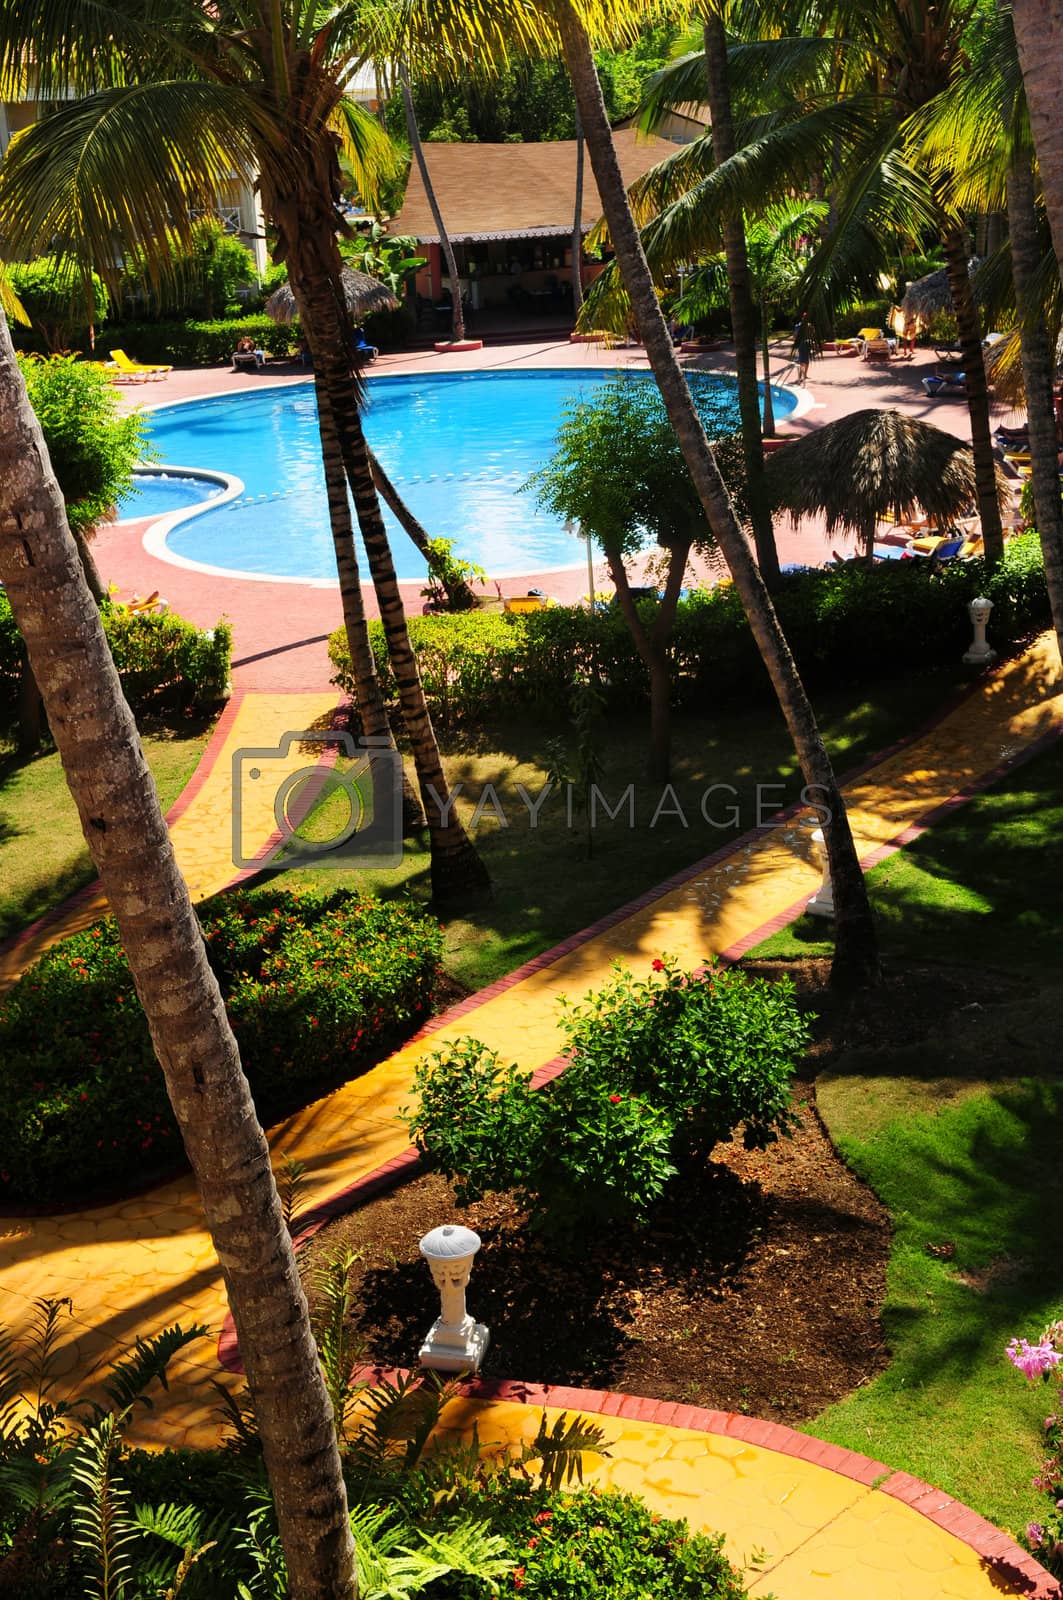 Royalty free image of Garden landscaping at tropical resort by elenathewise